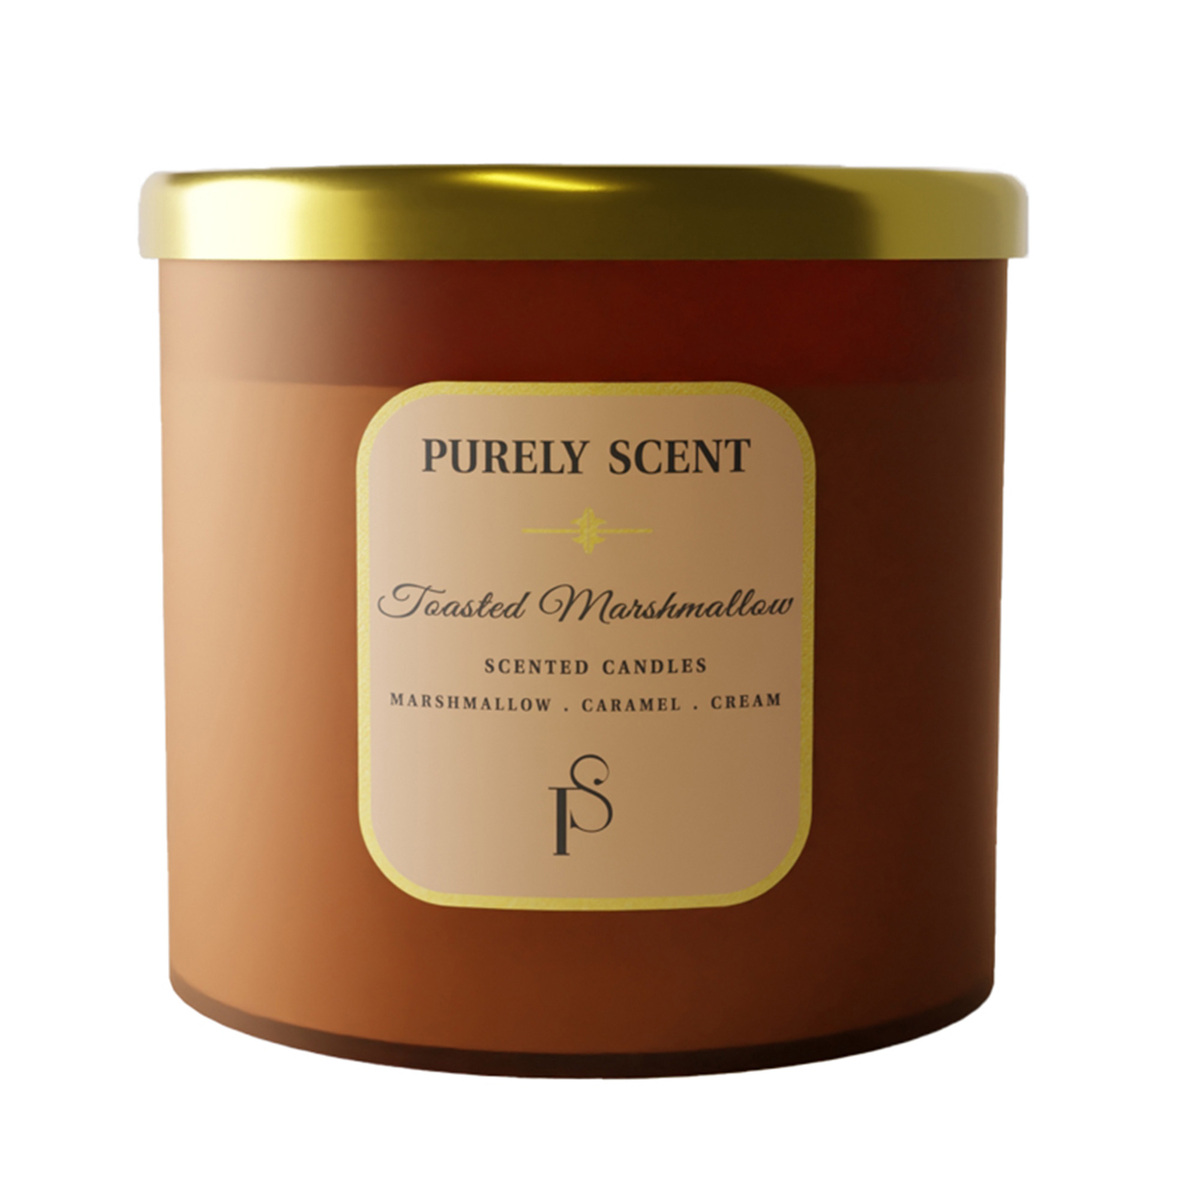 Purely Scent Toasted Marshmallow 100% Soy Wax Scented Jar Candle